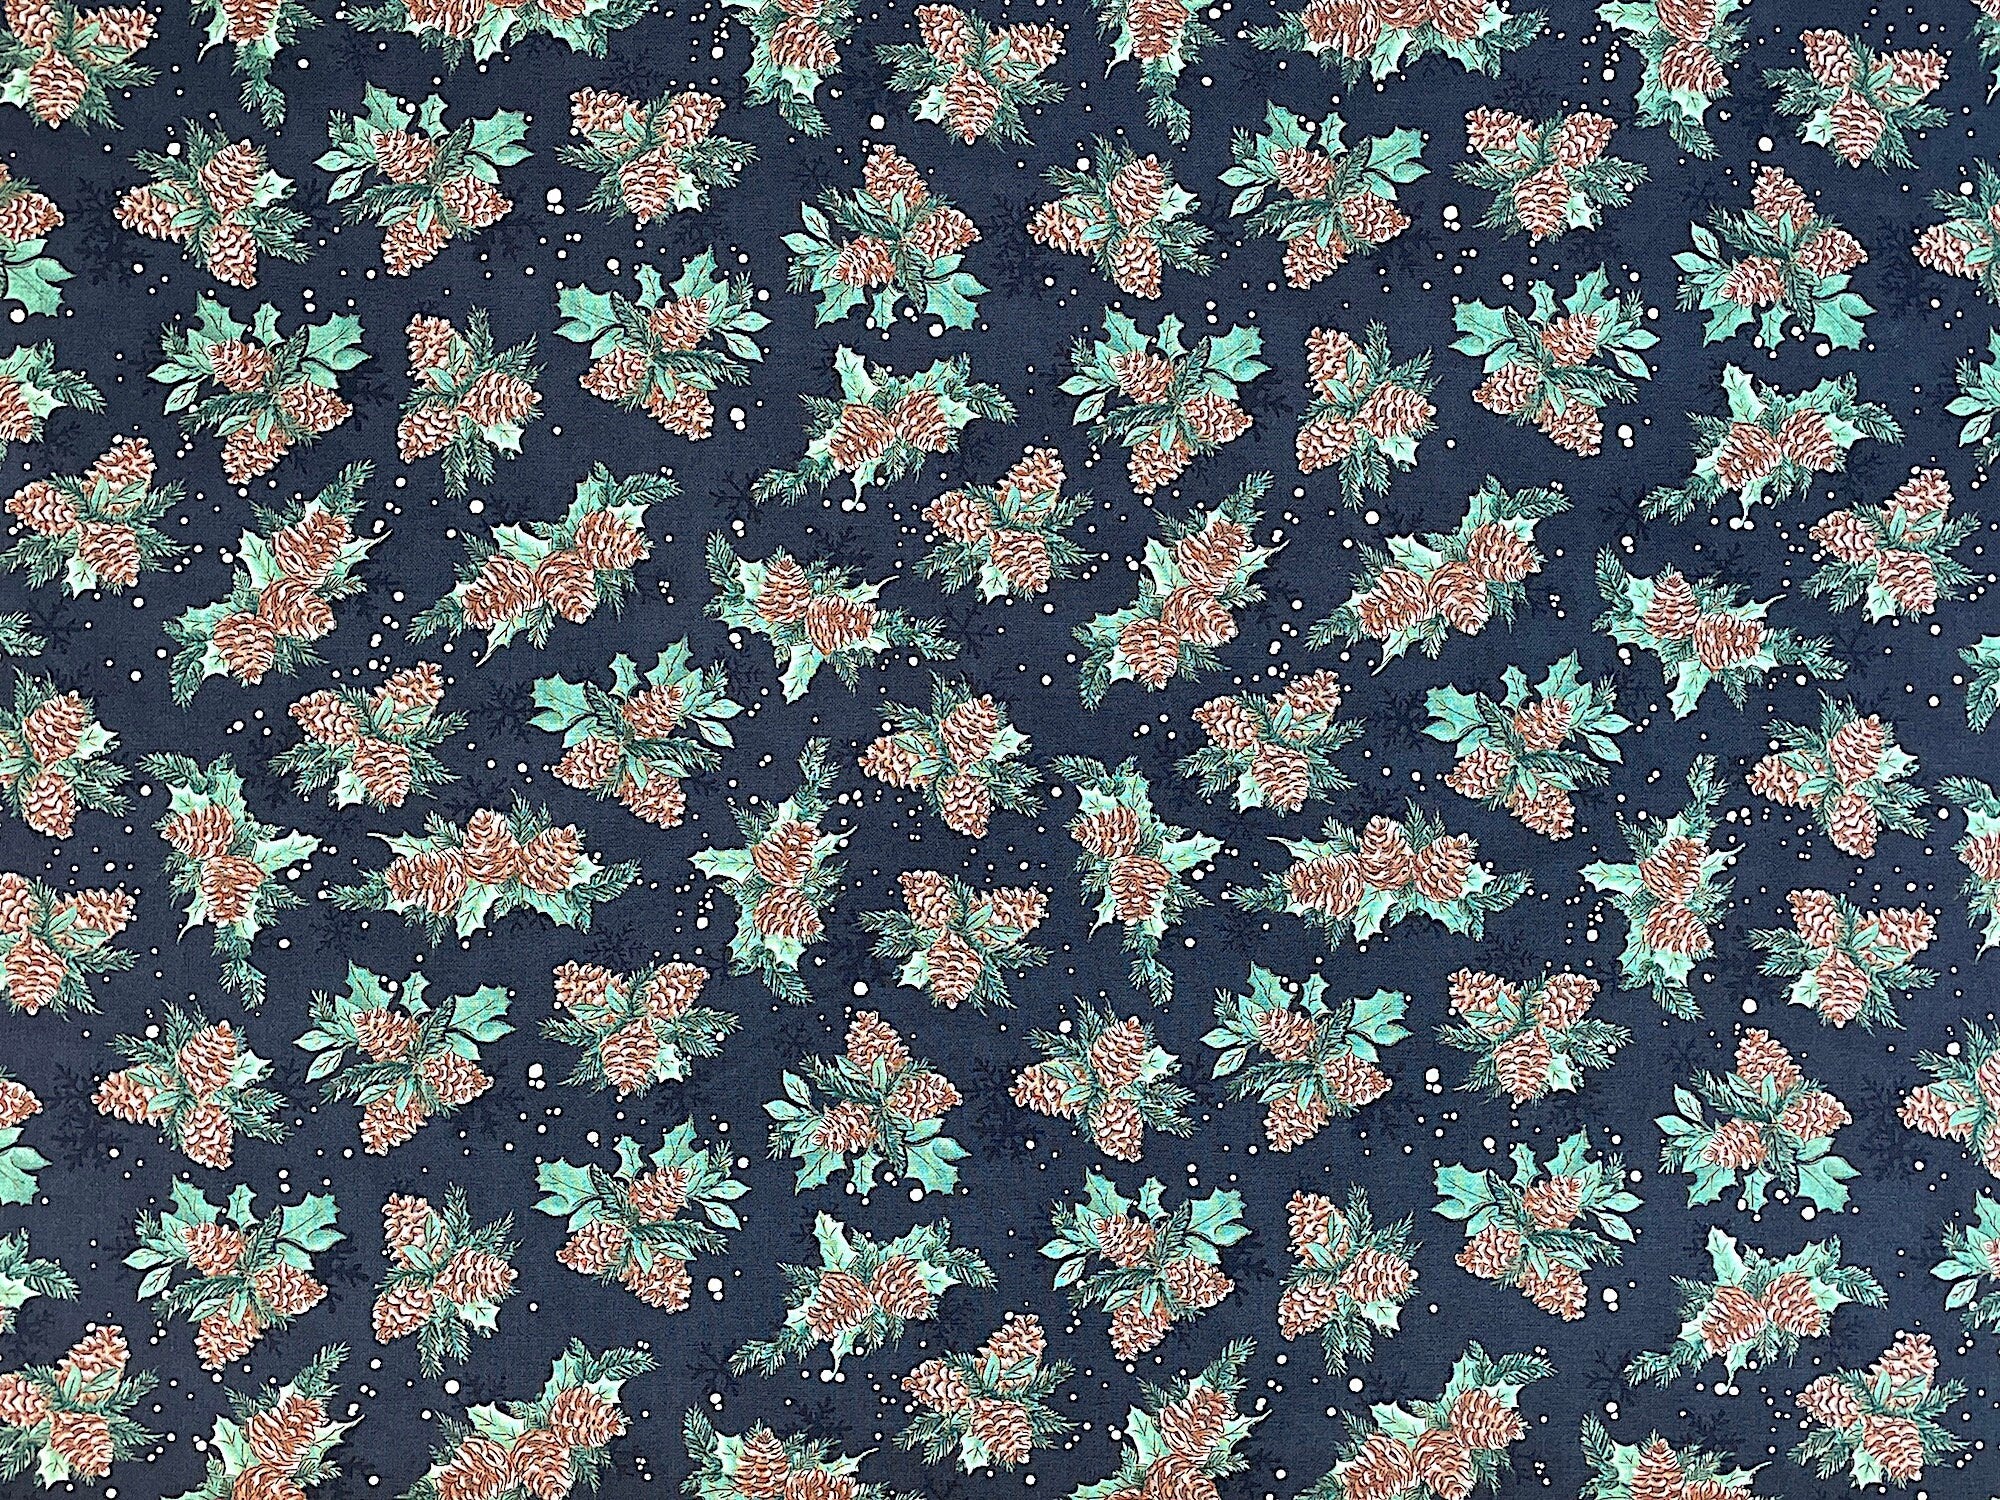 This black cotton fabric is covered with bunches of pinecones and leaves. This fabric is part of the Winter Forest collection by Wilmington Prints.